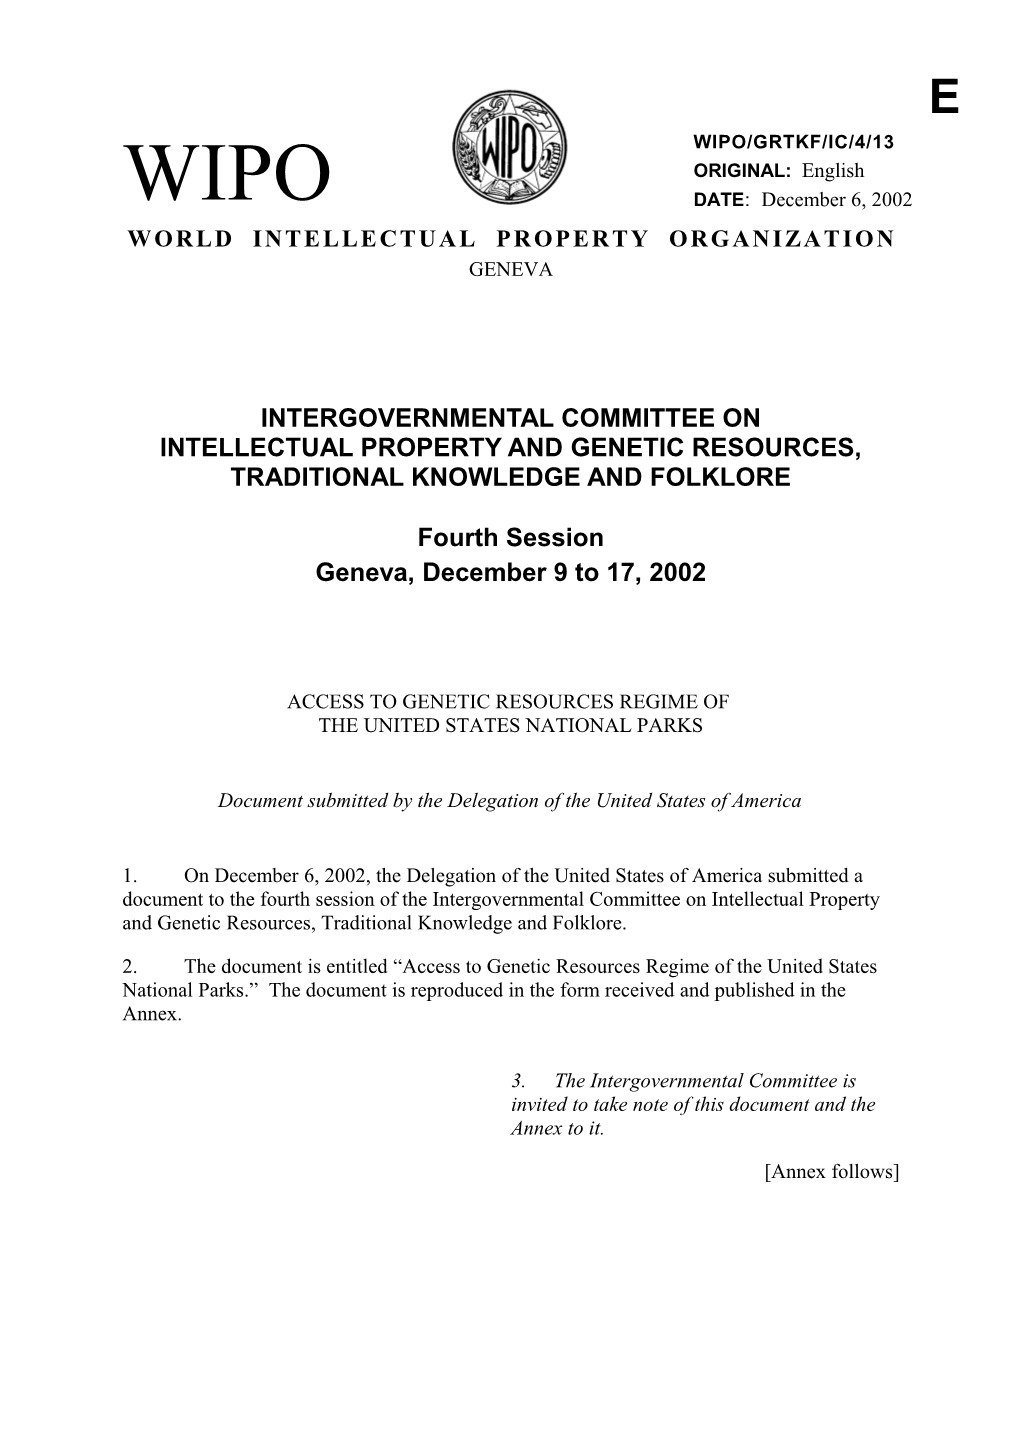 WIPO/GRTKF/IC/4/13: Access to Genetic Resources Regime of the United States National Parks